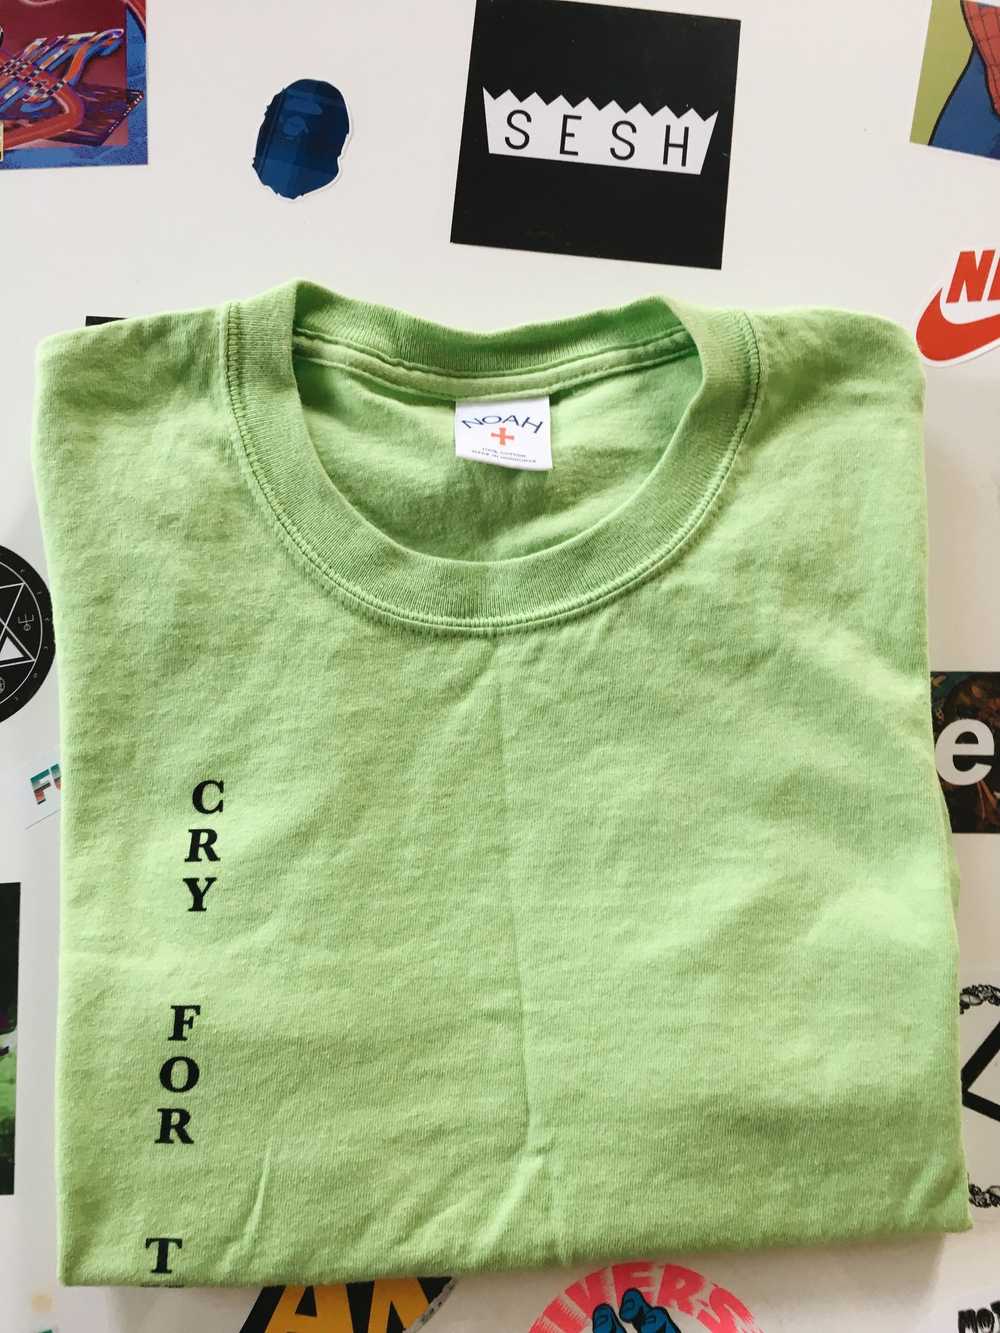 Noah Noah NYC Cry For The New World T-shirt Lime - image 3